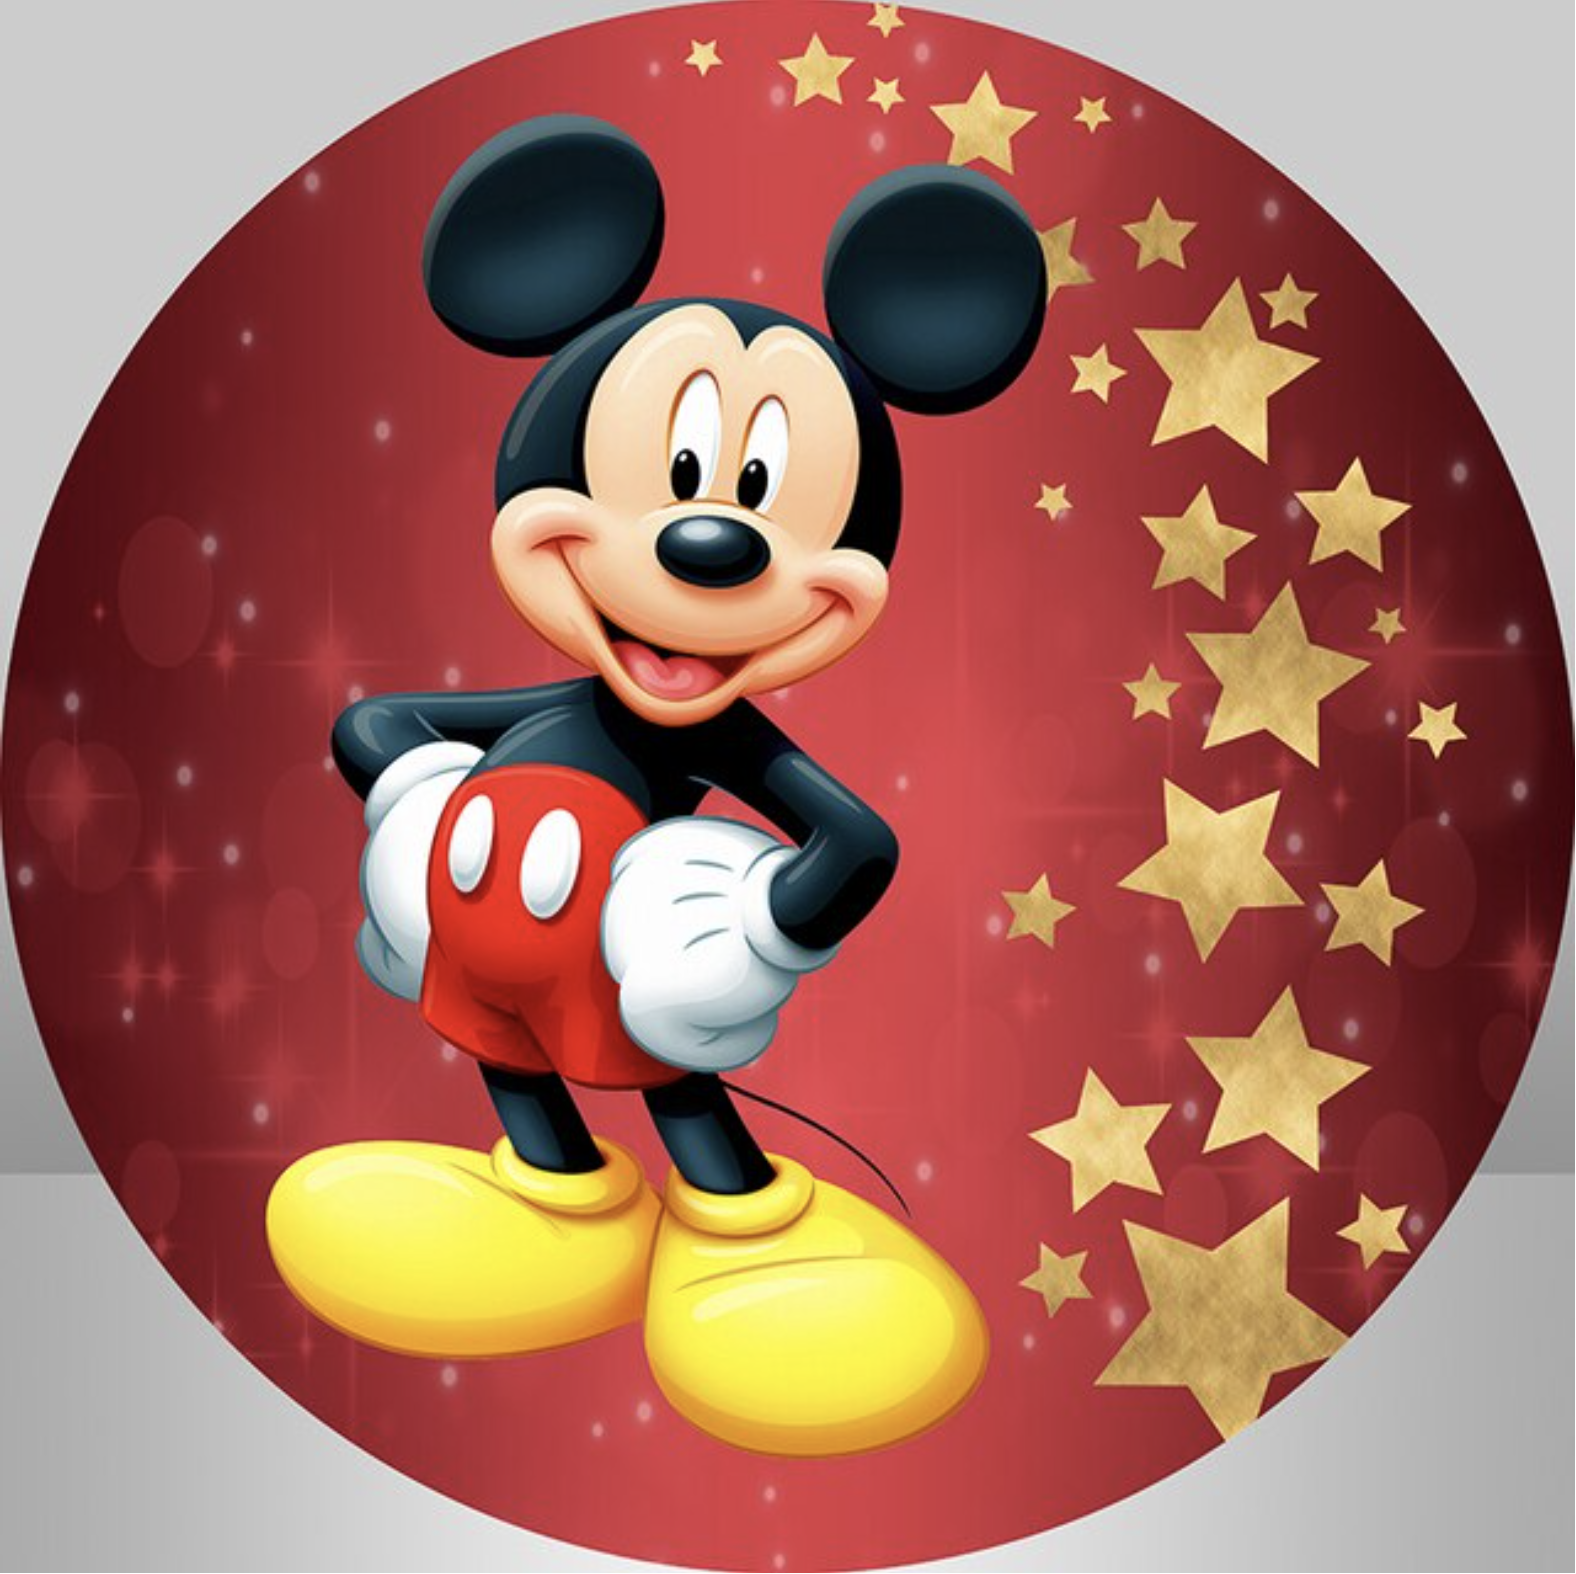 Sueño Respectivamente Maletín MICKEY MOUSE RED GOLD STARS GLITTER PARTY SUPPLIES ROUND BIRTHDAY  PERSONALISED BANNER BACKDROP DECORATION - Beebi Belle